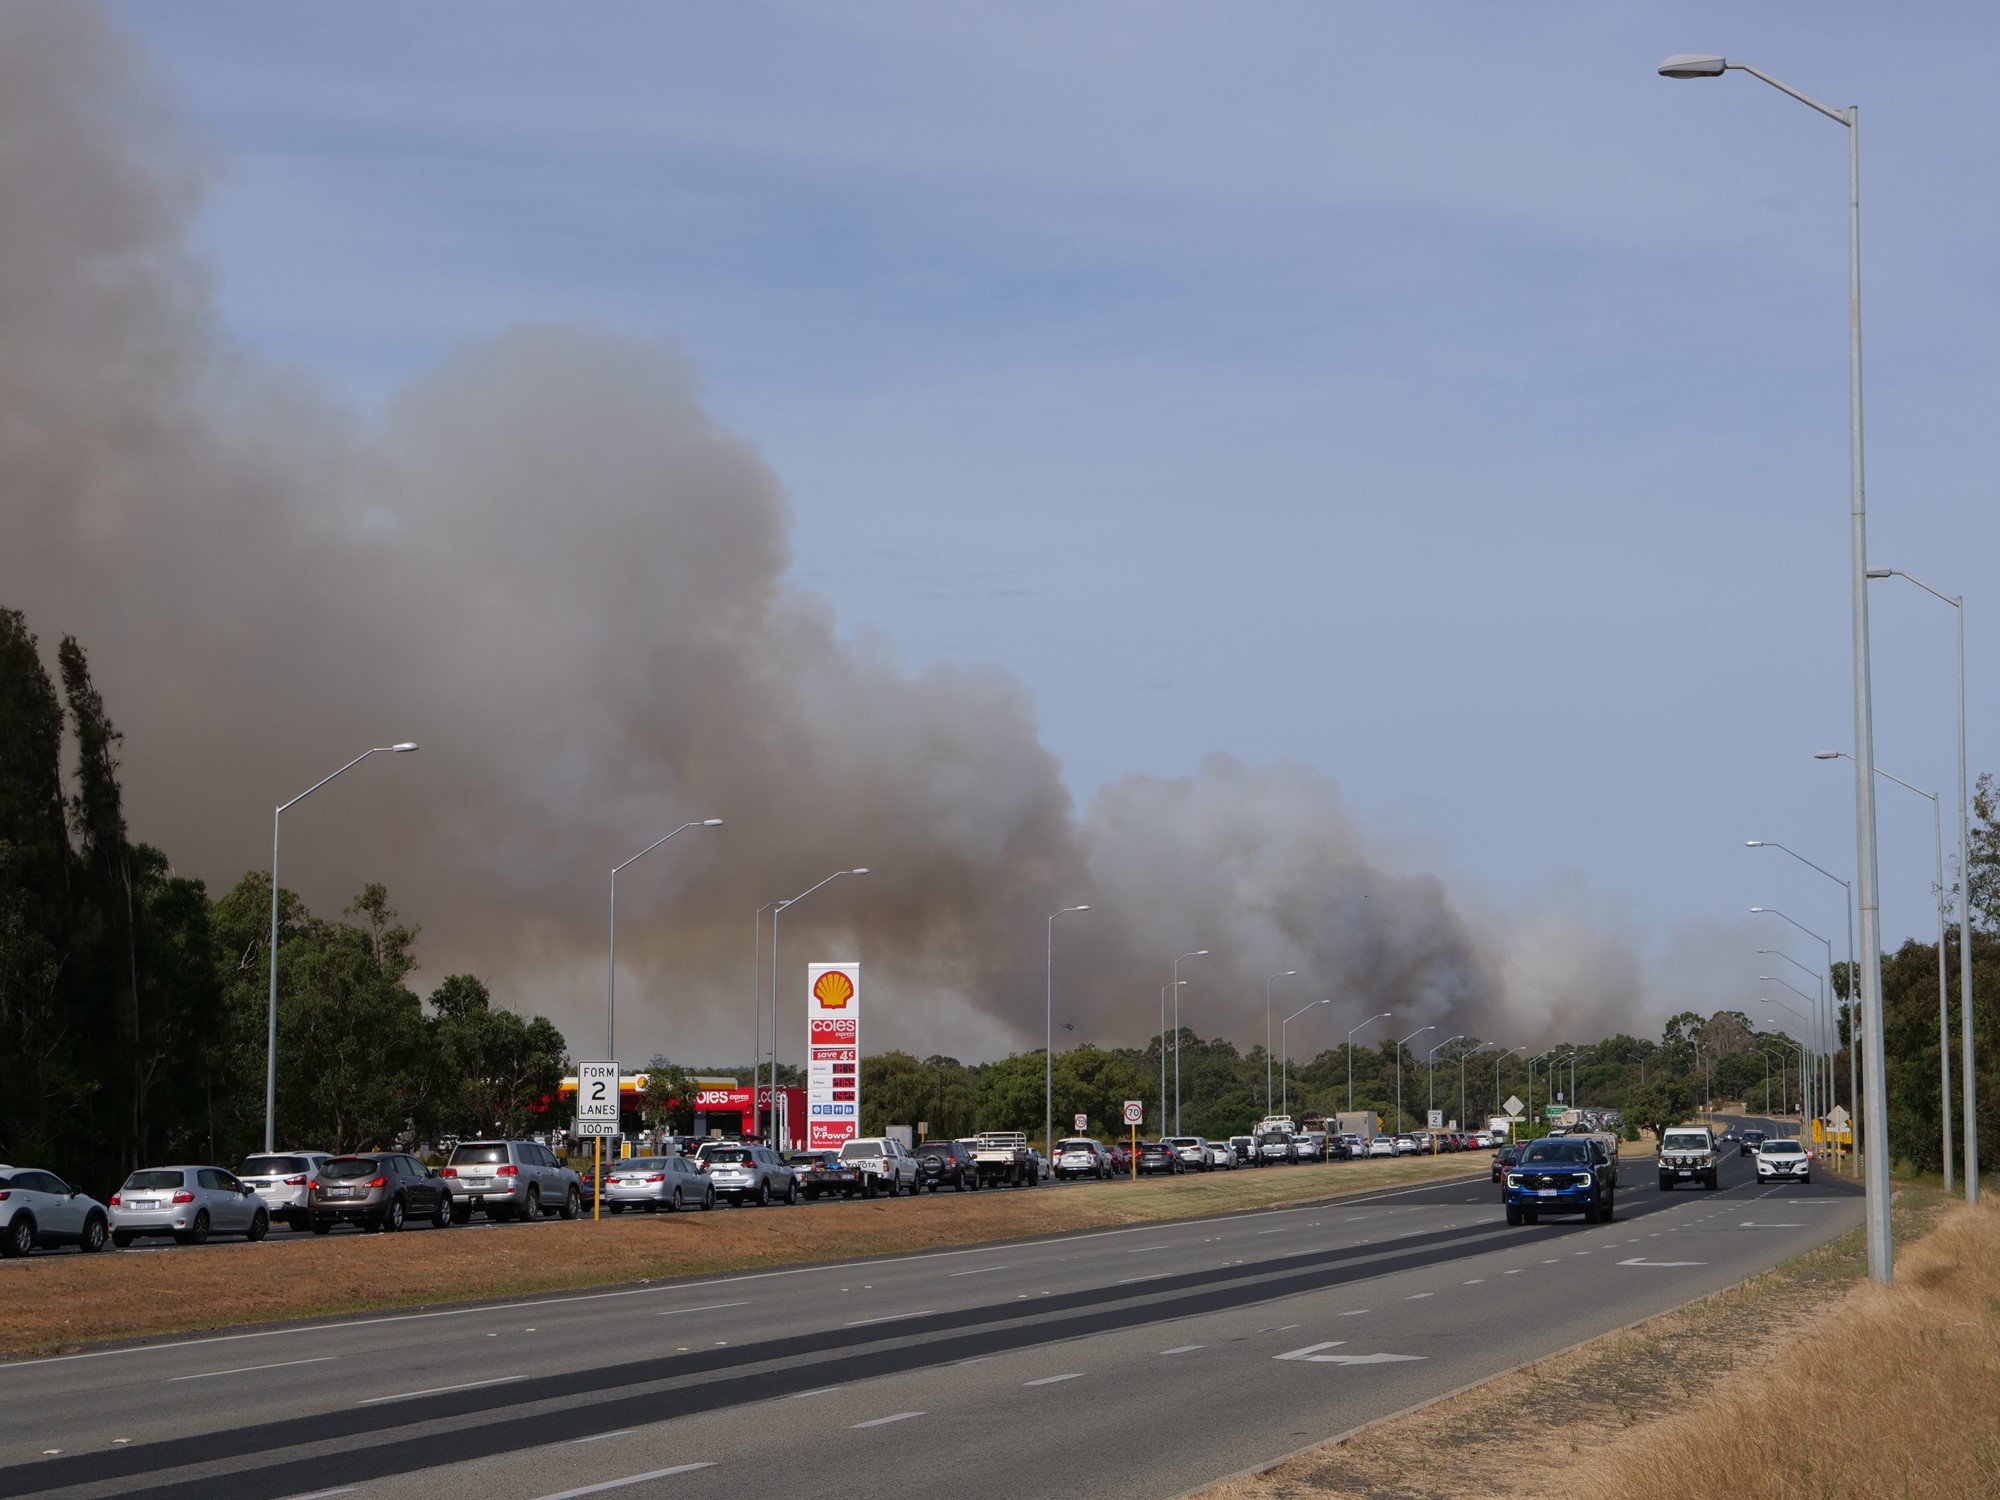 A highway with smoke in the background and a large line of cars backed up.